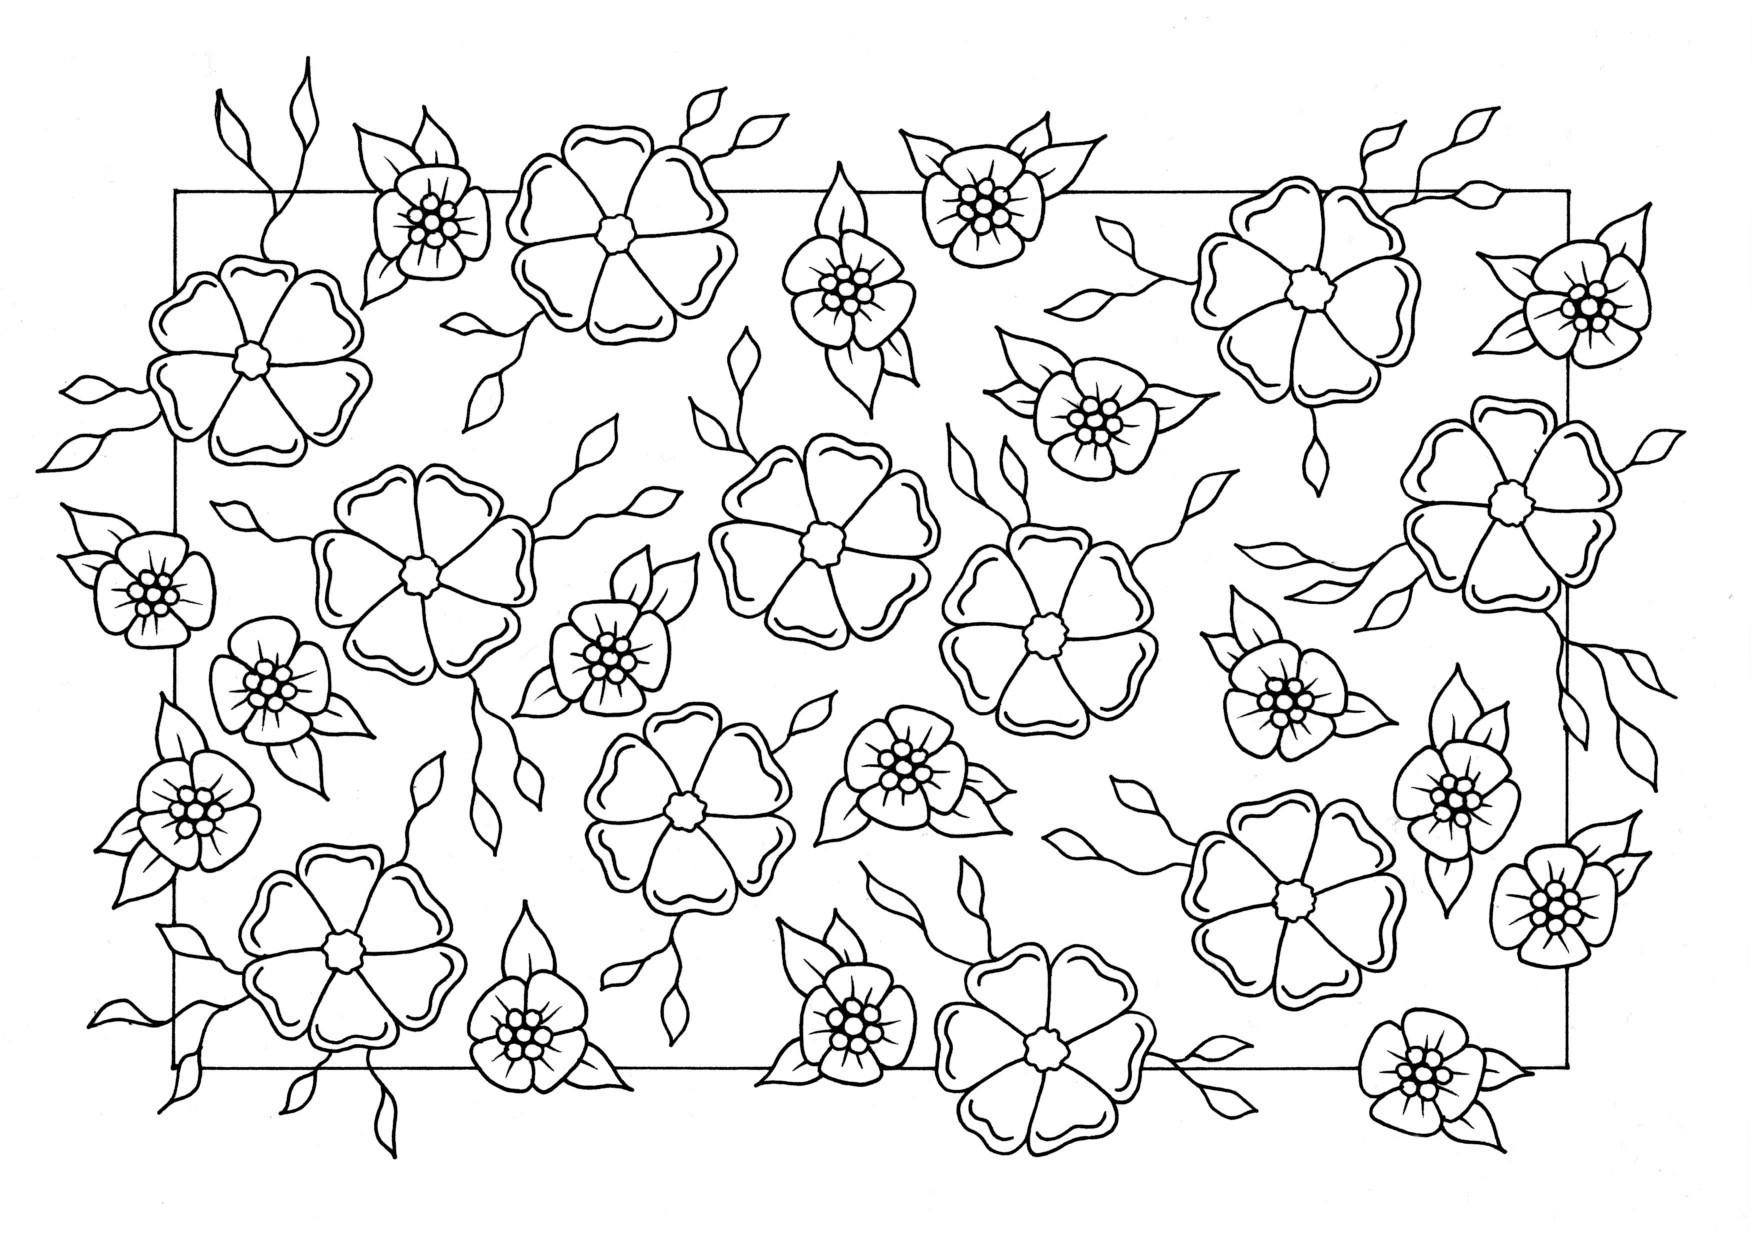 Coloring Page: A lot of blossoms